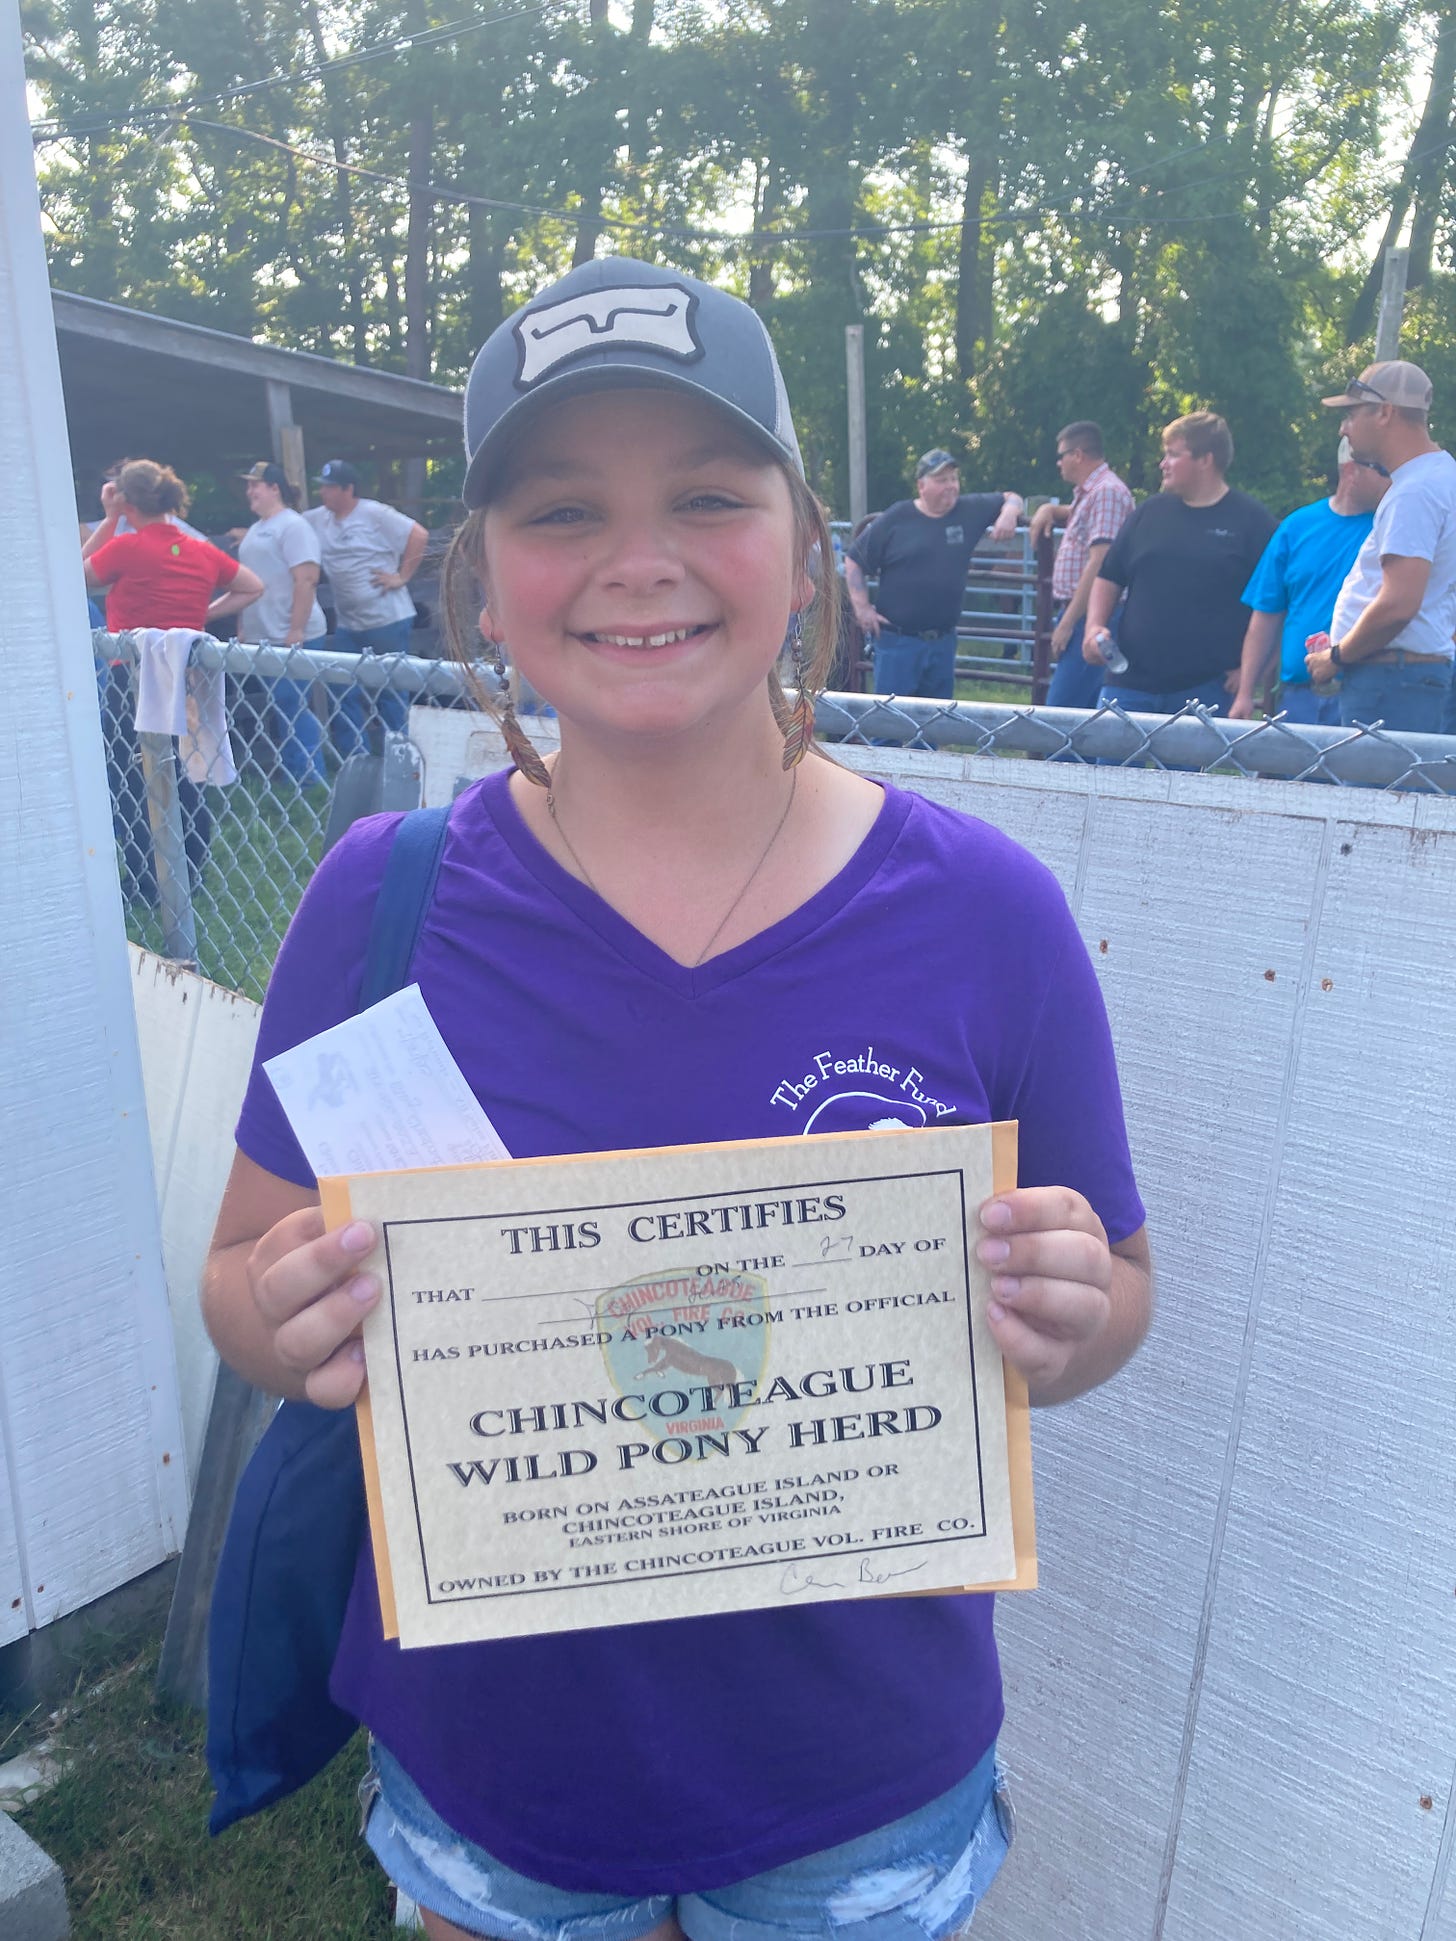  A teenage girl in a purple t shirt and blue hat, standing by a white fence, with a beige certificate that certifies her ownership of a member of the Chincoteage Wild Pony Herd